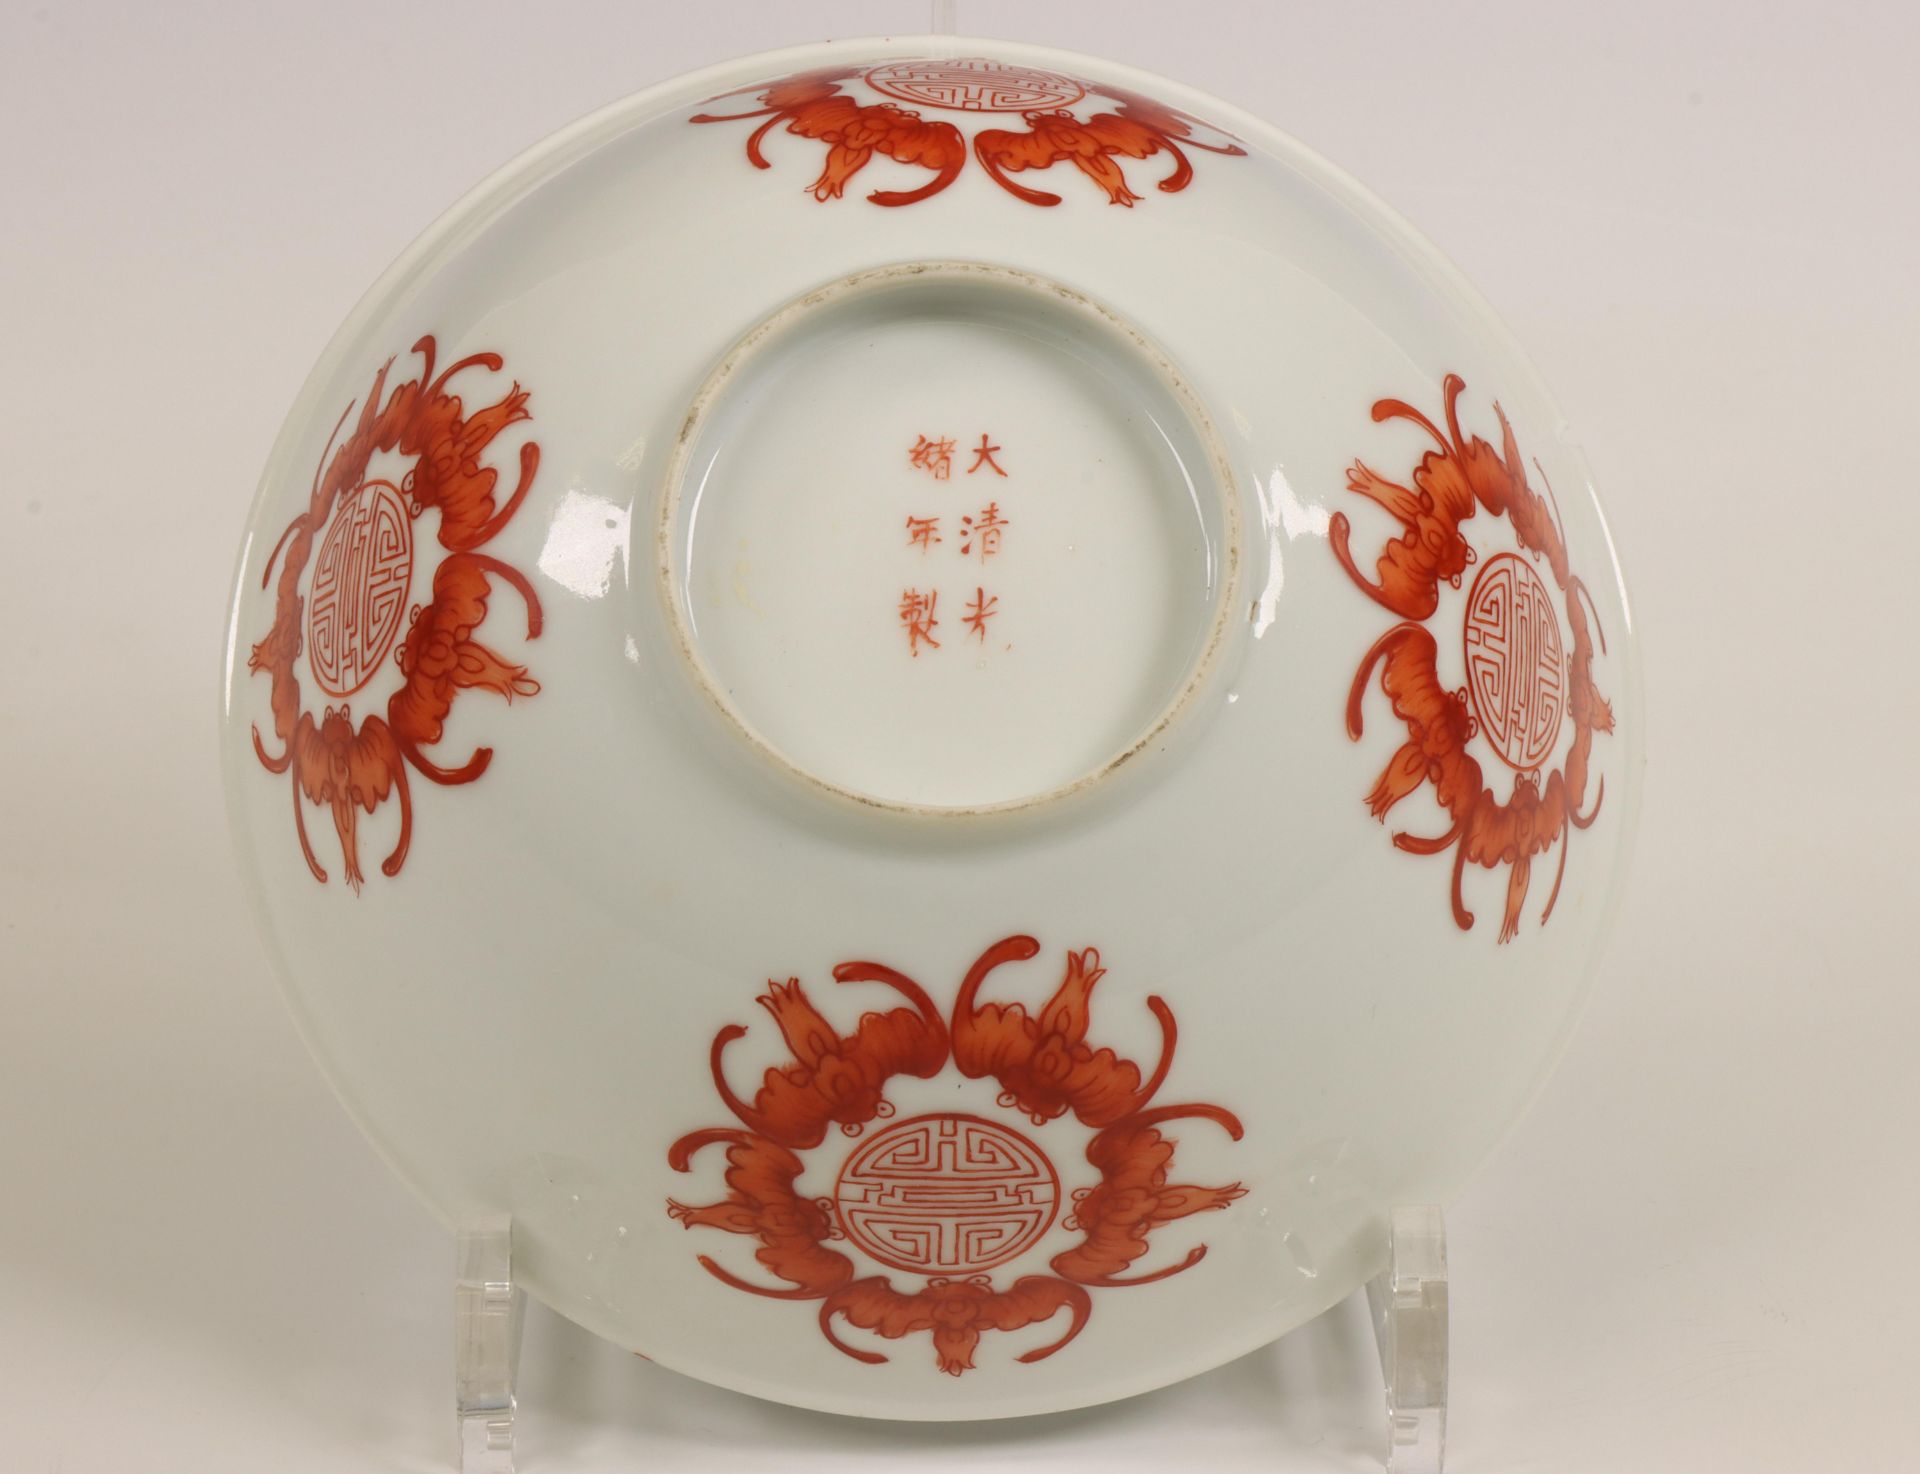 China, an iron-red decorated 'Shou character' bowl, late 19th-early 20th century, - Image 3 of 3